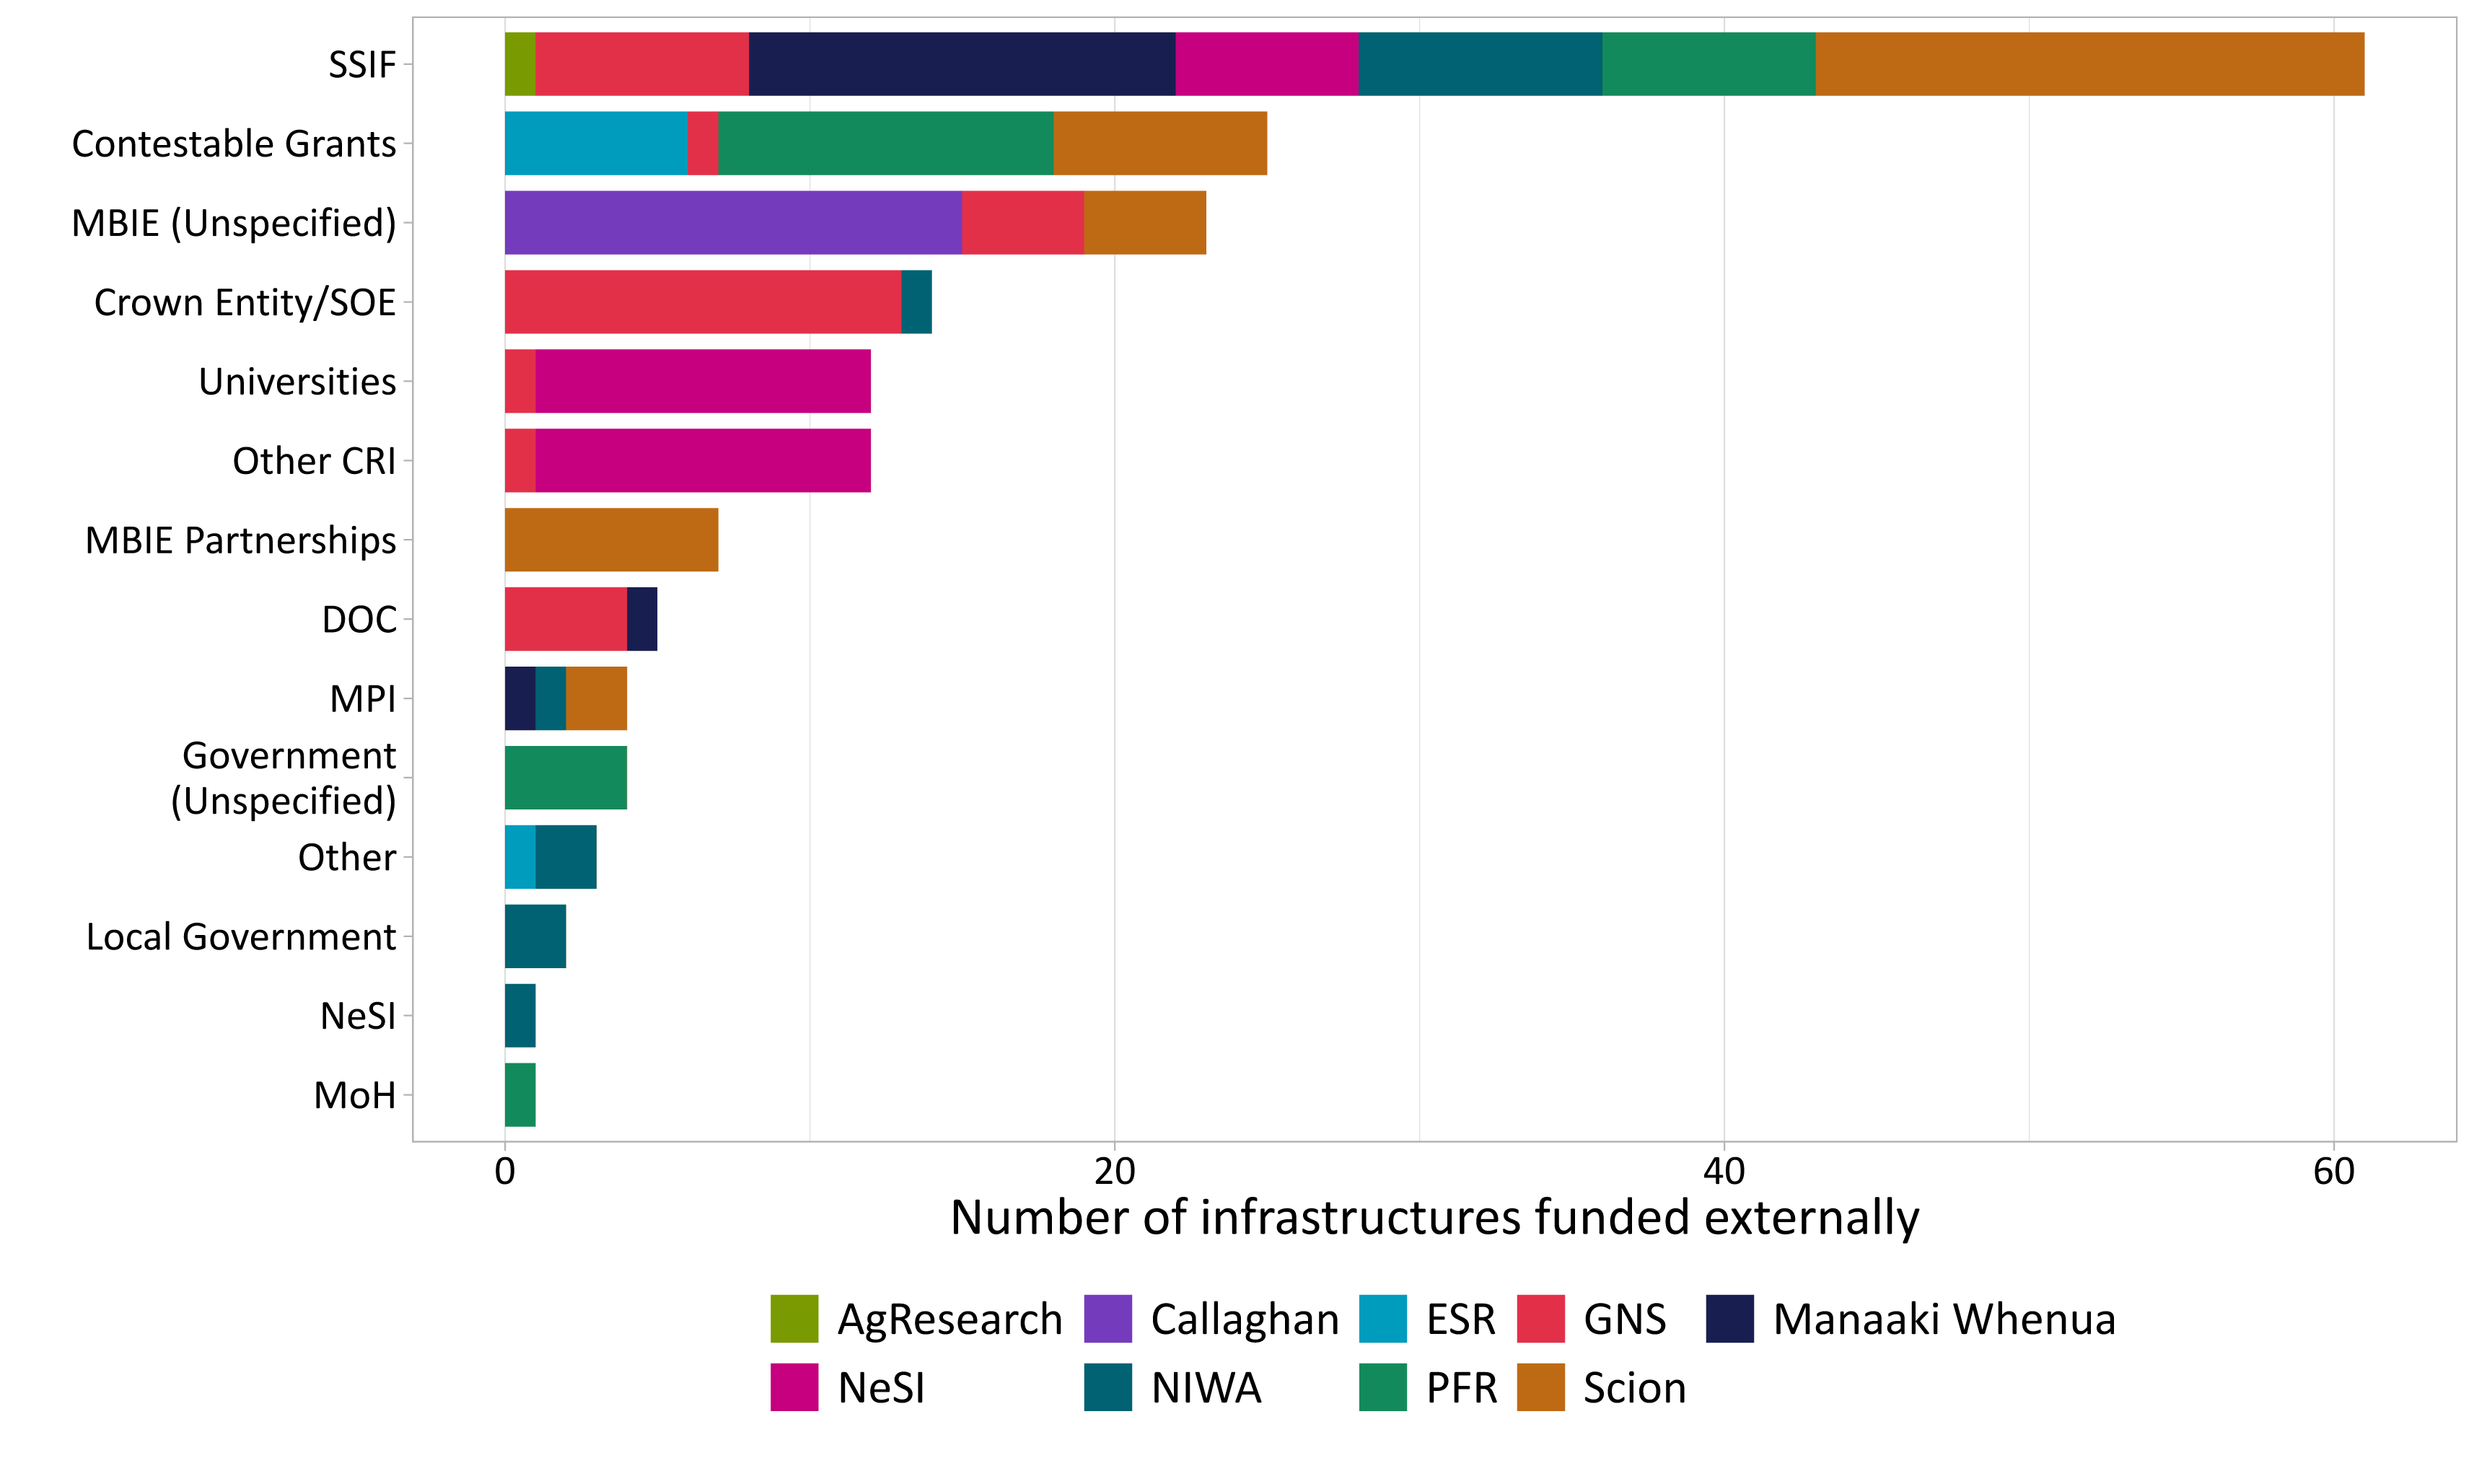 figure13 number of infrastructures linked to each external funding sources in the kitmap data